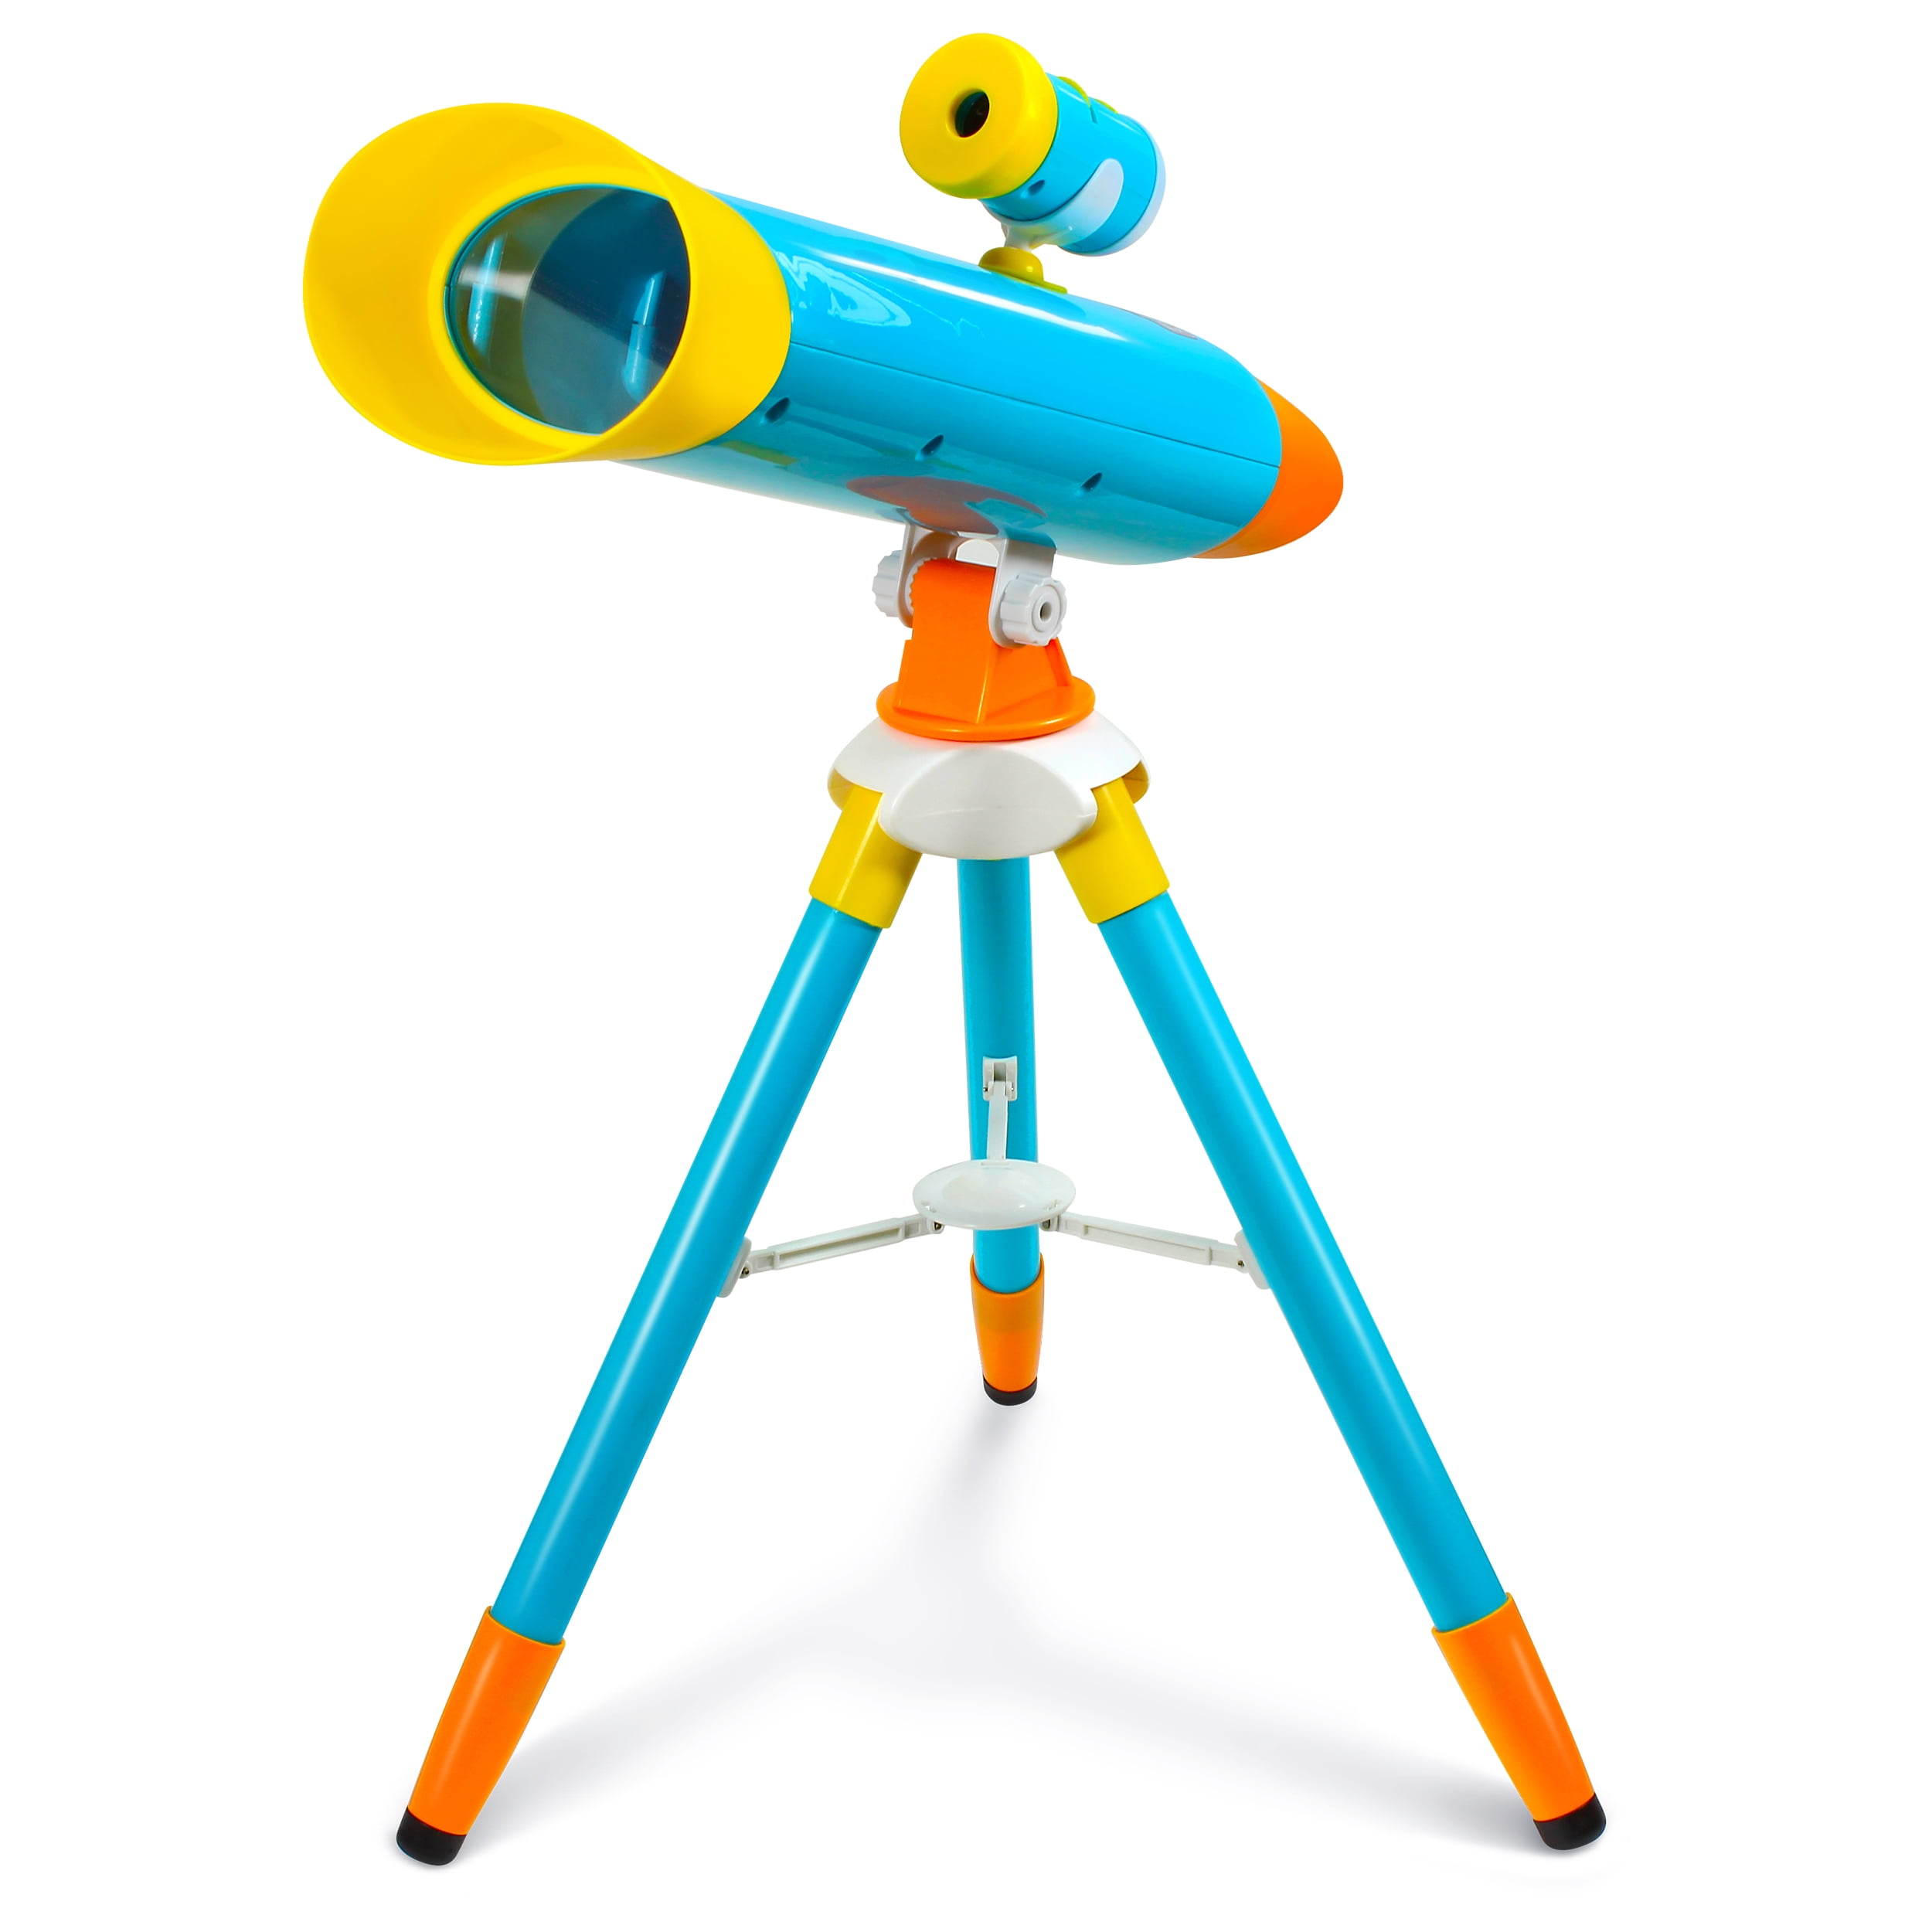 Window-pick Telescope Toys Monocular Pirate Telescope DIY Assembly Observation Toy Spyglass Science Toy for Kids Outdoor Playground efficient 